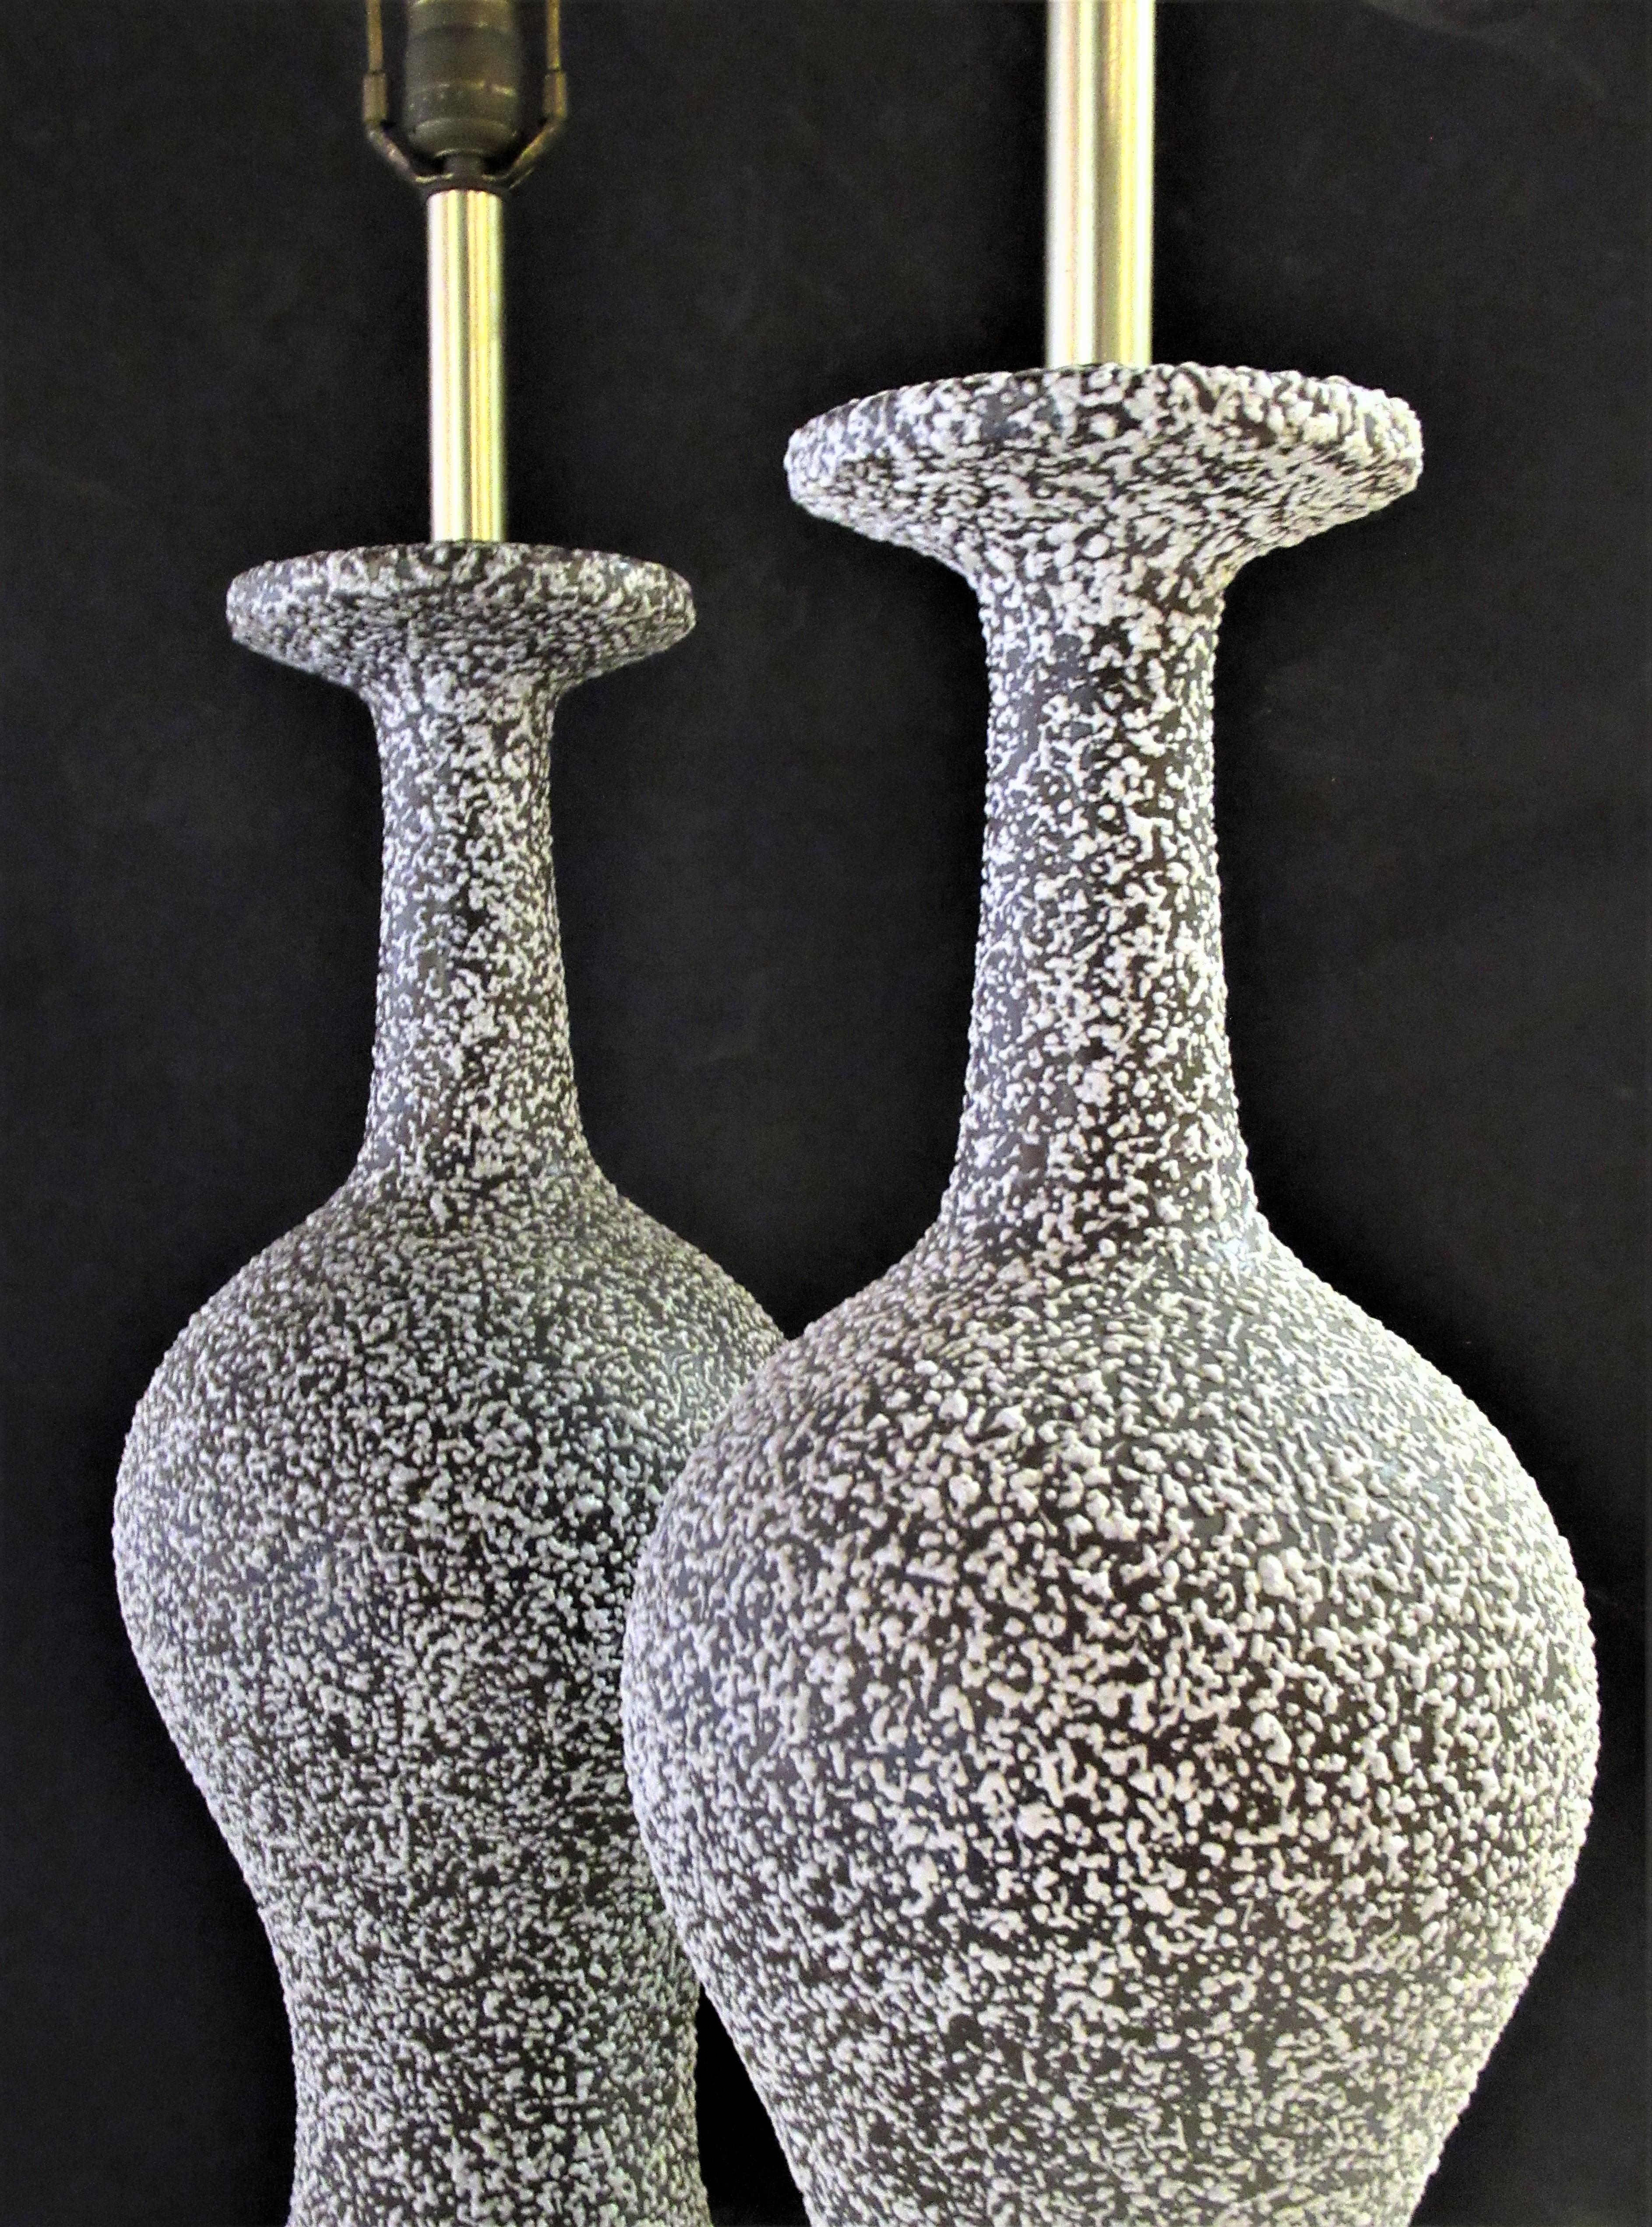 A pair of finely textured speckle glazed ceramic table lamps with a great looking tall elongated neck bottle form. Very good quality. Circa 1950. Beautiful lamps. Look at all pictures and read condition report in comment section.